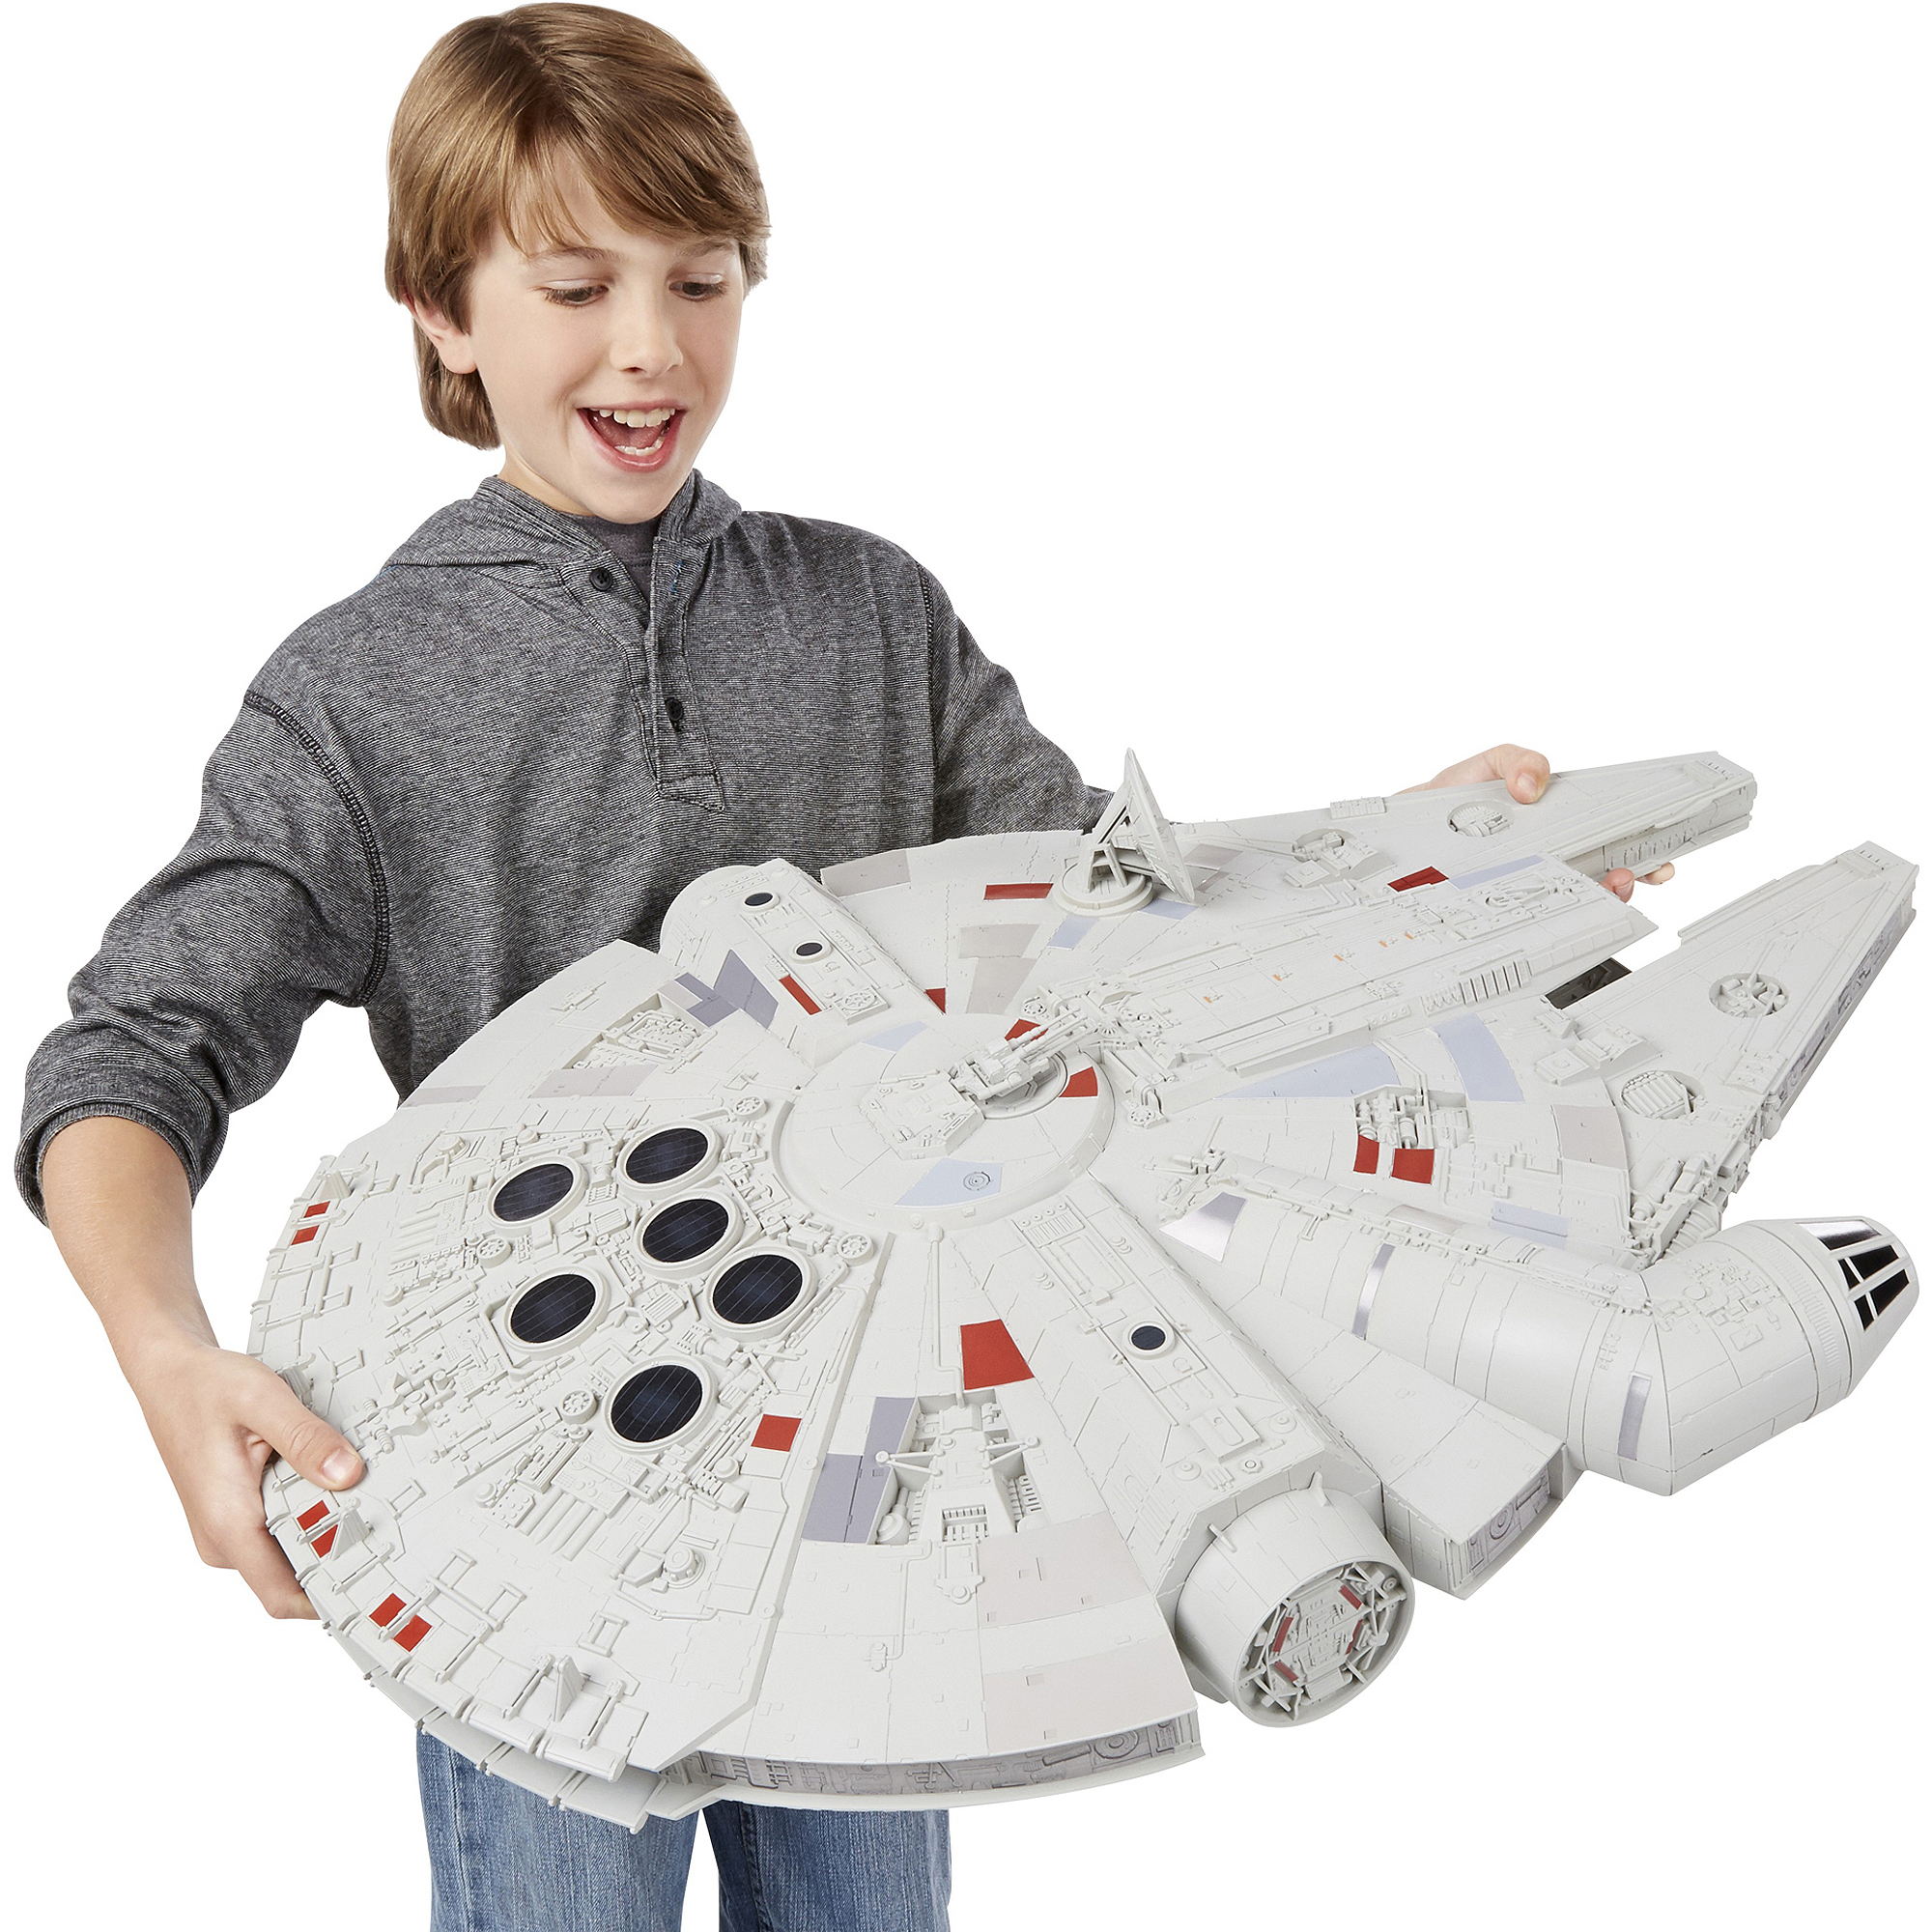 Disney s Star Wars Rebels Millennium Falcon Vehicle by Hasbro - image 4 of 7